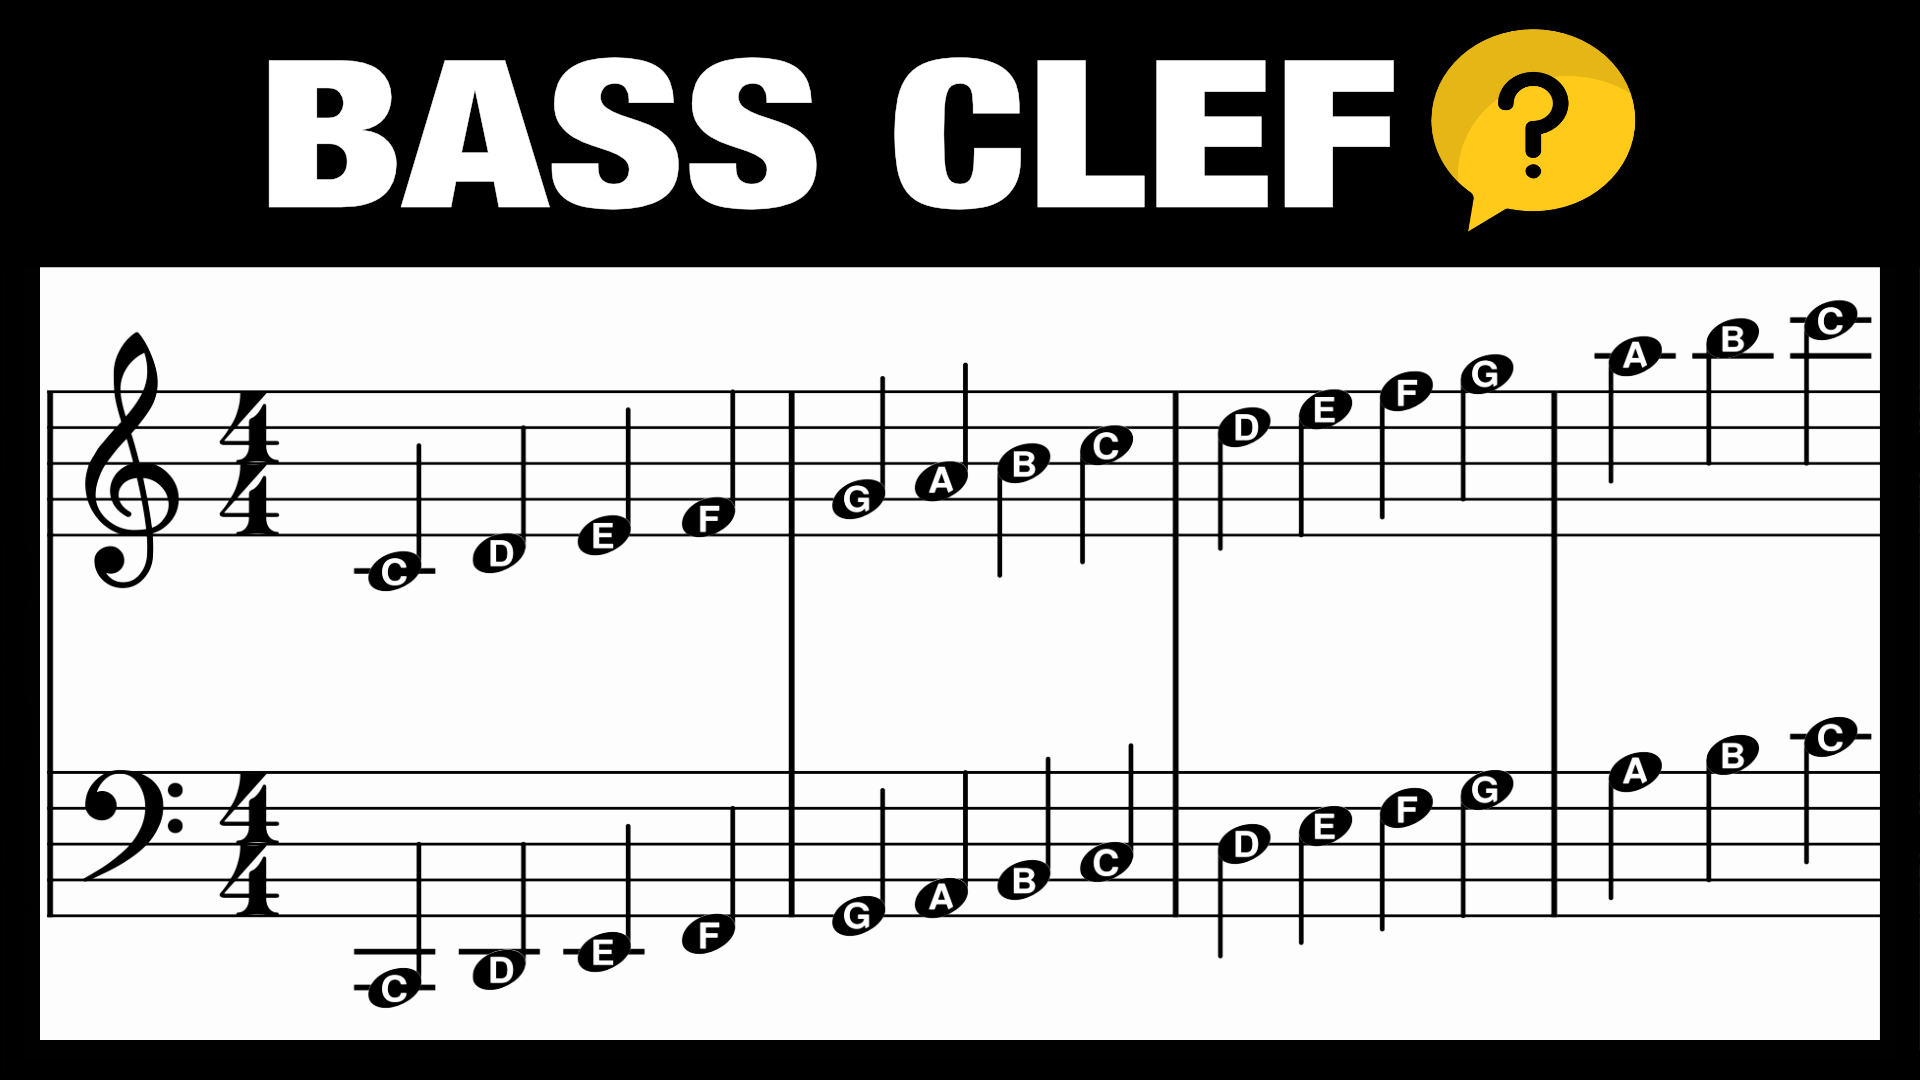 bass-clef-notes-piano-musc-101-unit-2-theory-basics-hear-and-sing